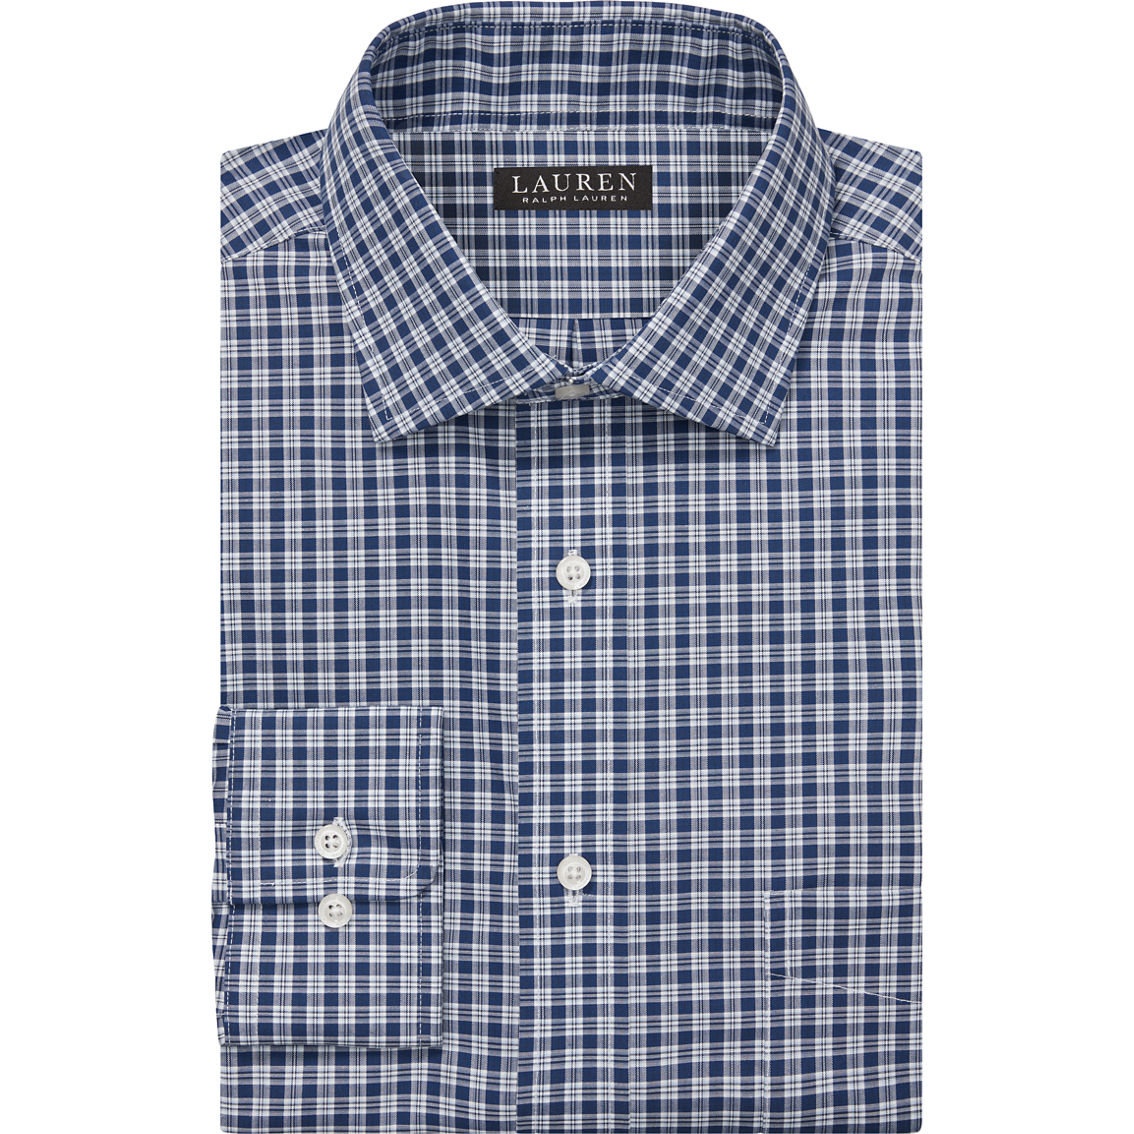 Ralph Lauren Classic Fit Ultra Wrinkle Free Stretch Plaid Dress Shirt - Image 2 of 2